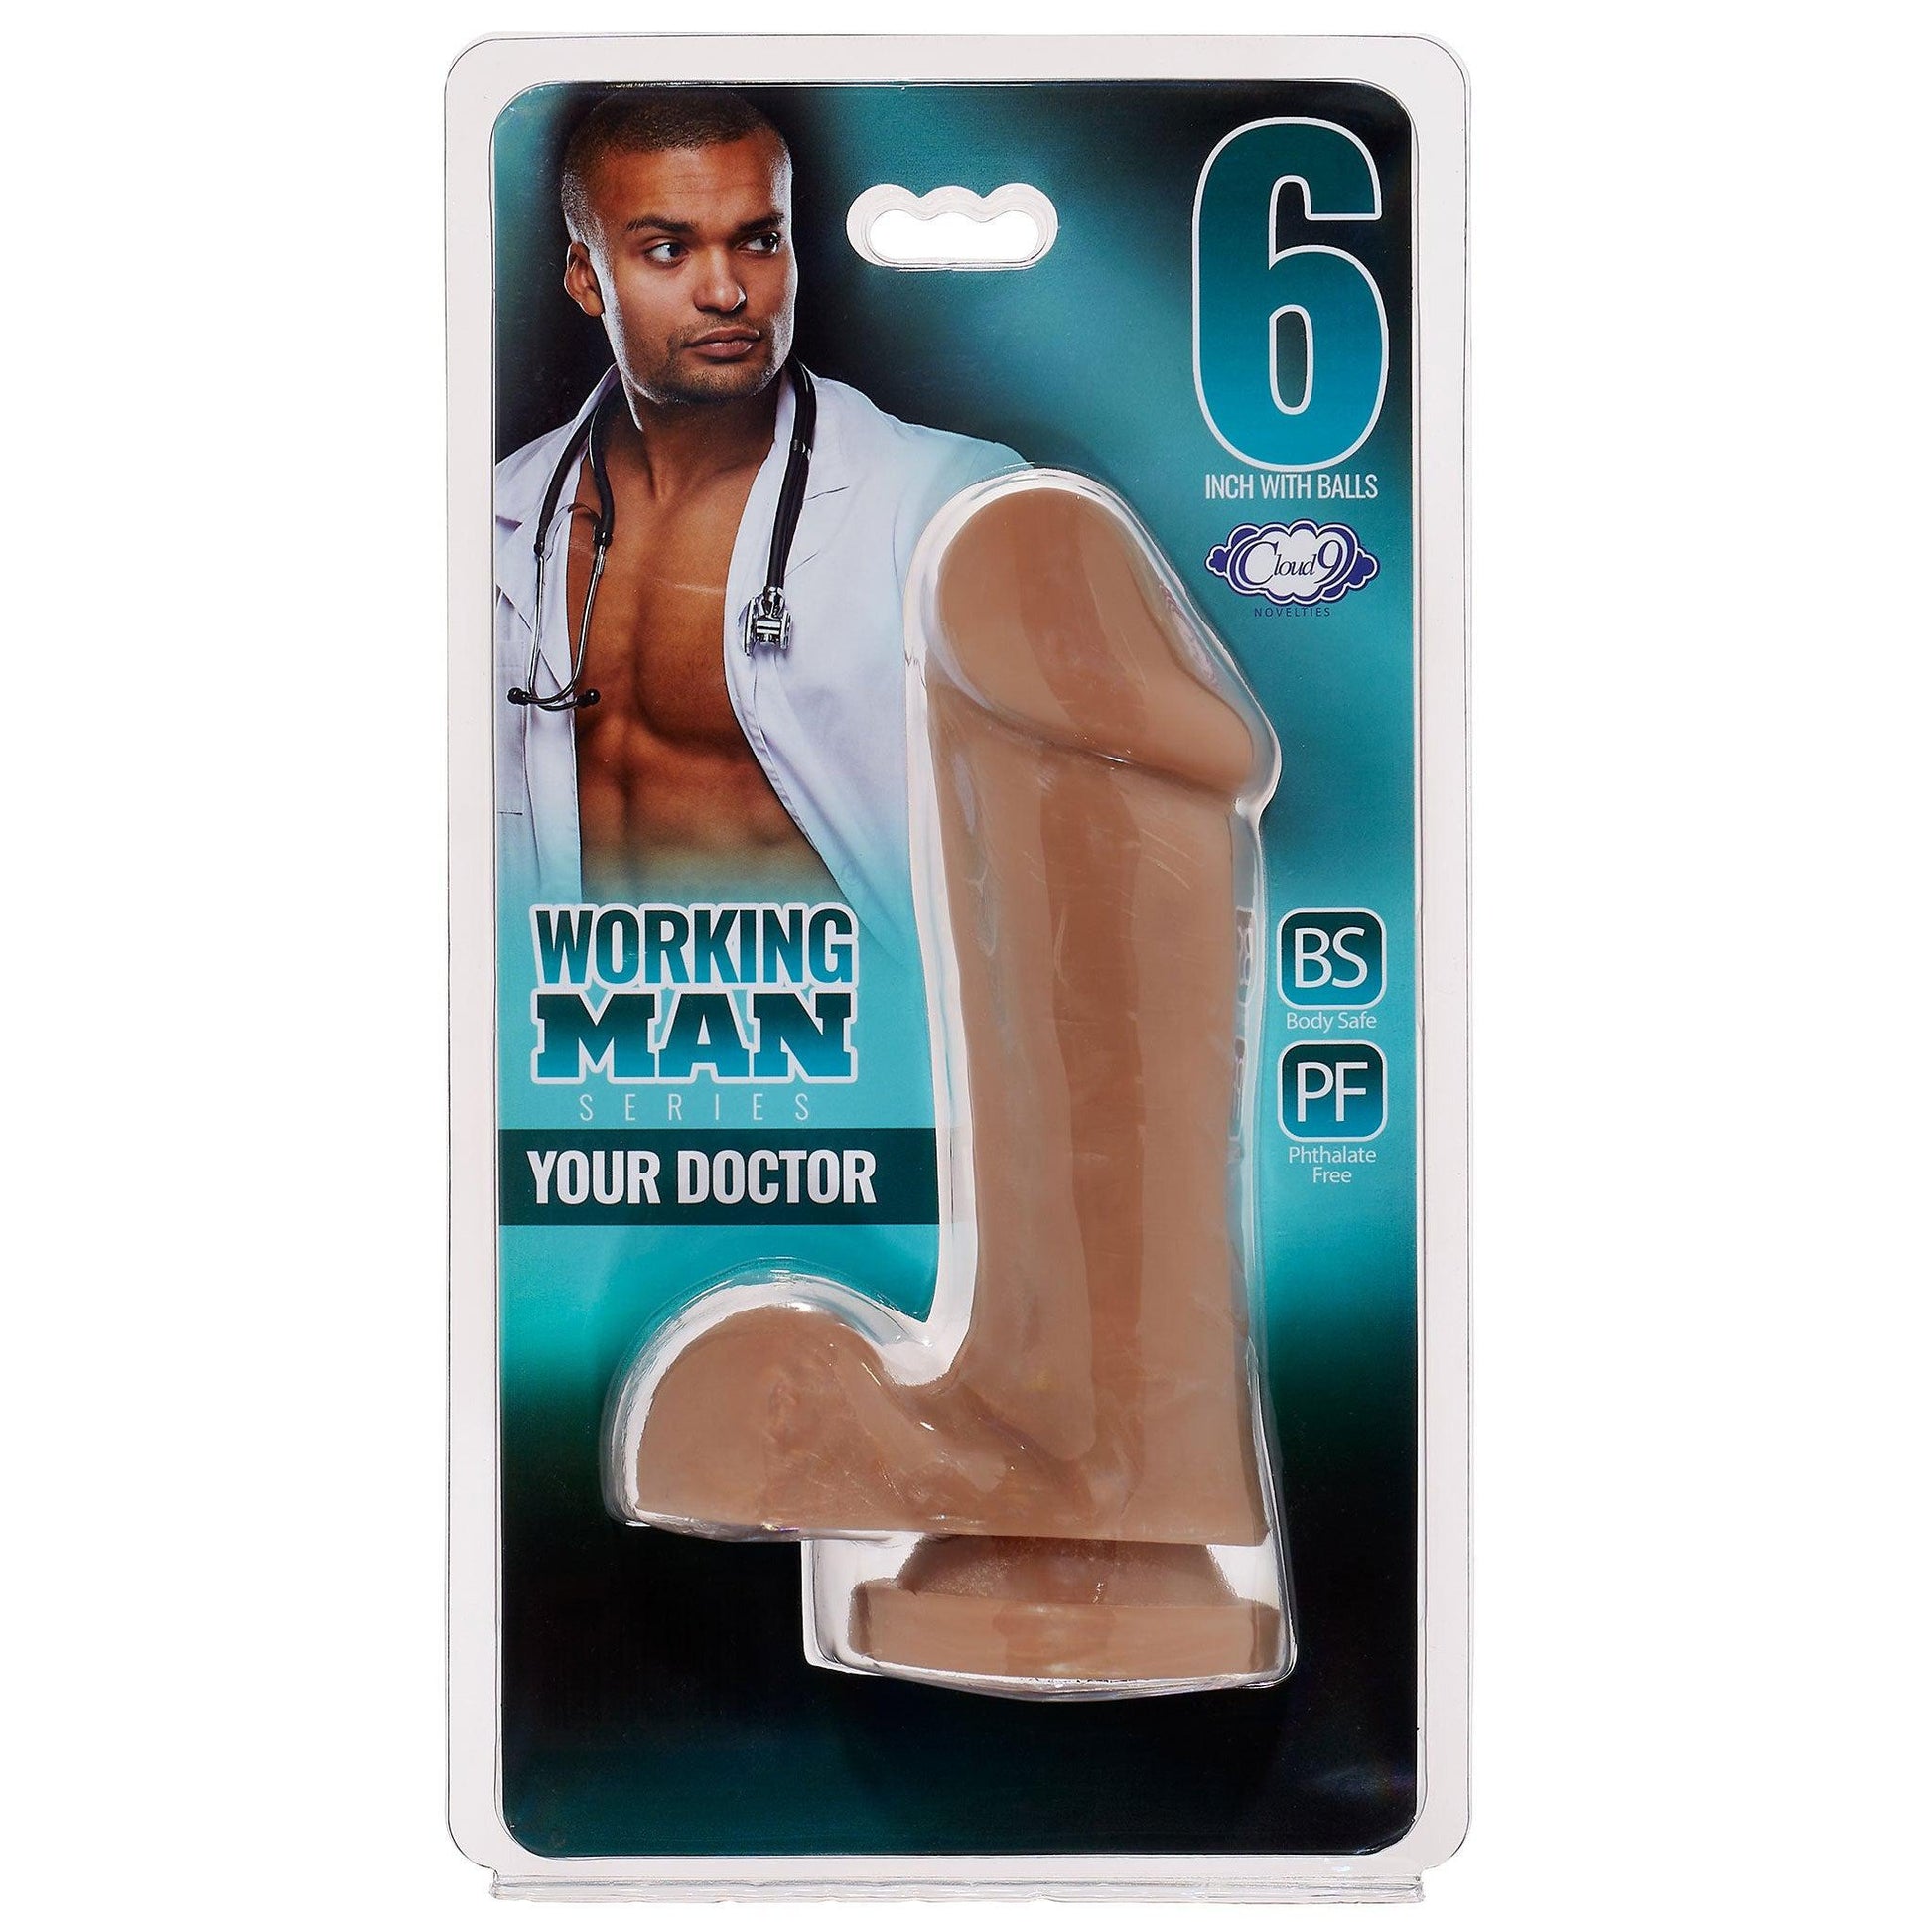 Cloud 9 Working Man 6 Inch With Balls - Your  Doctor - Tan